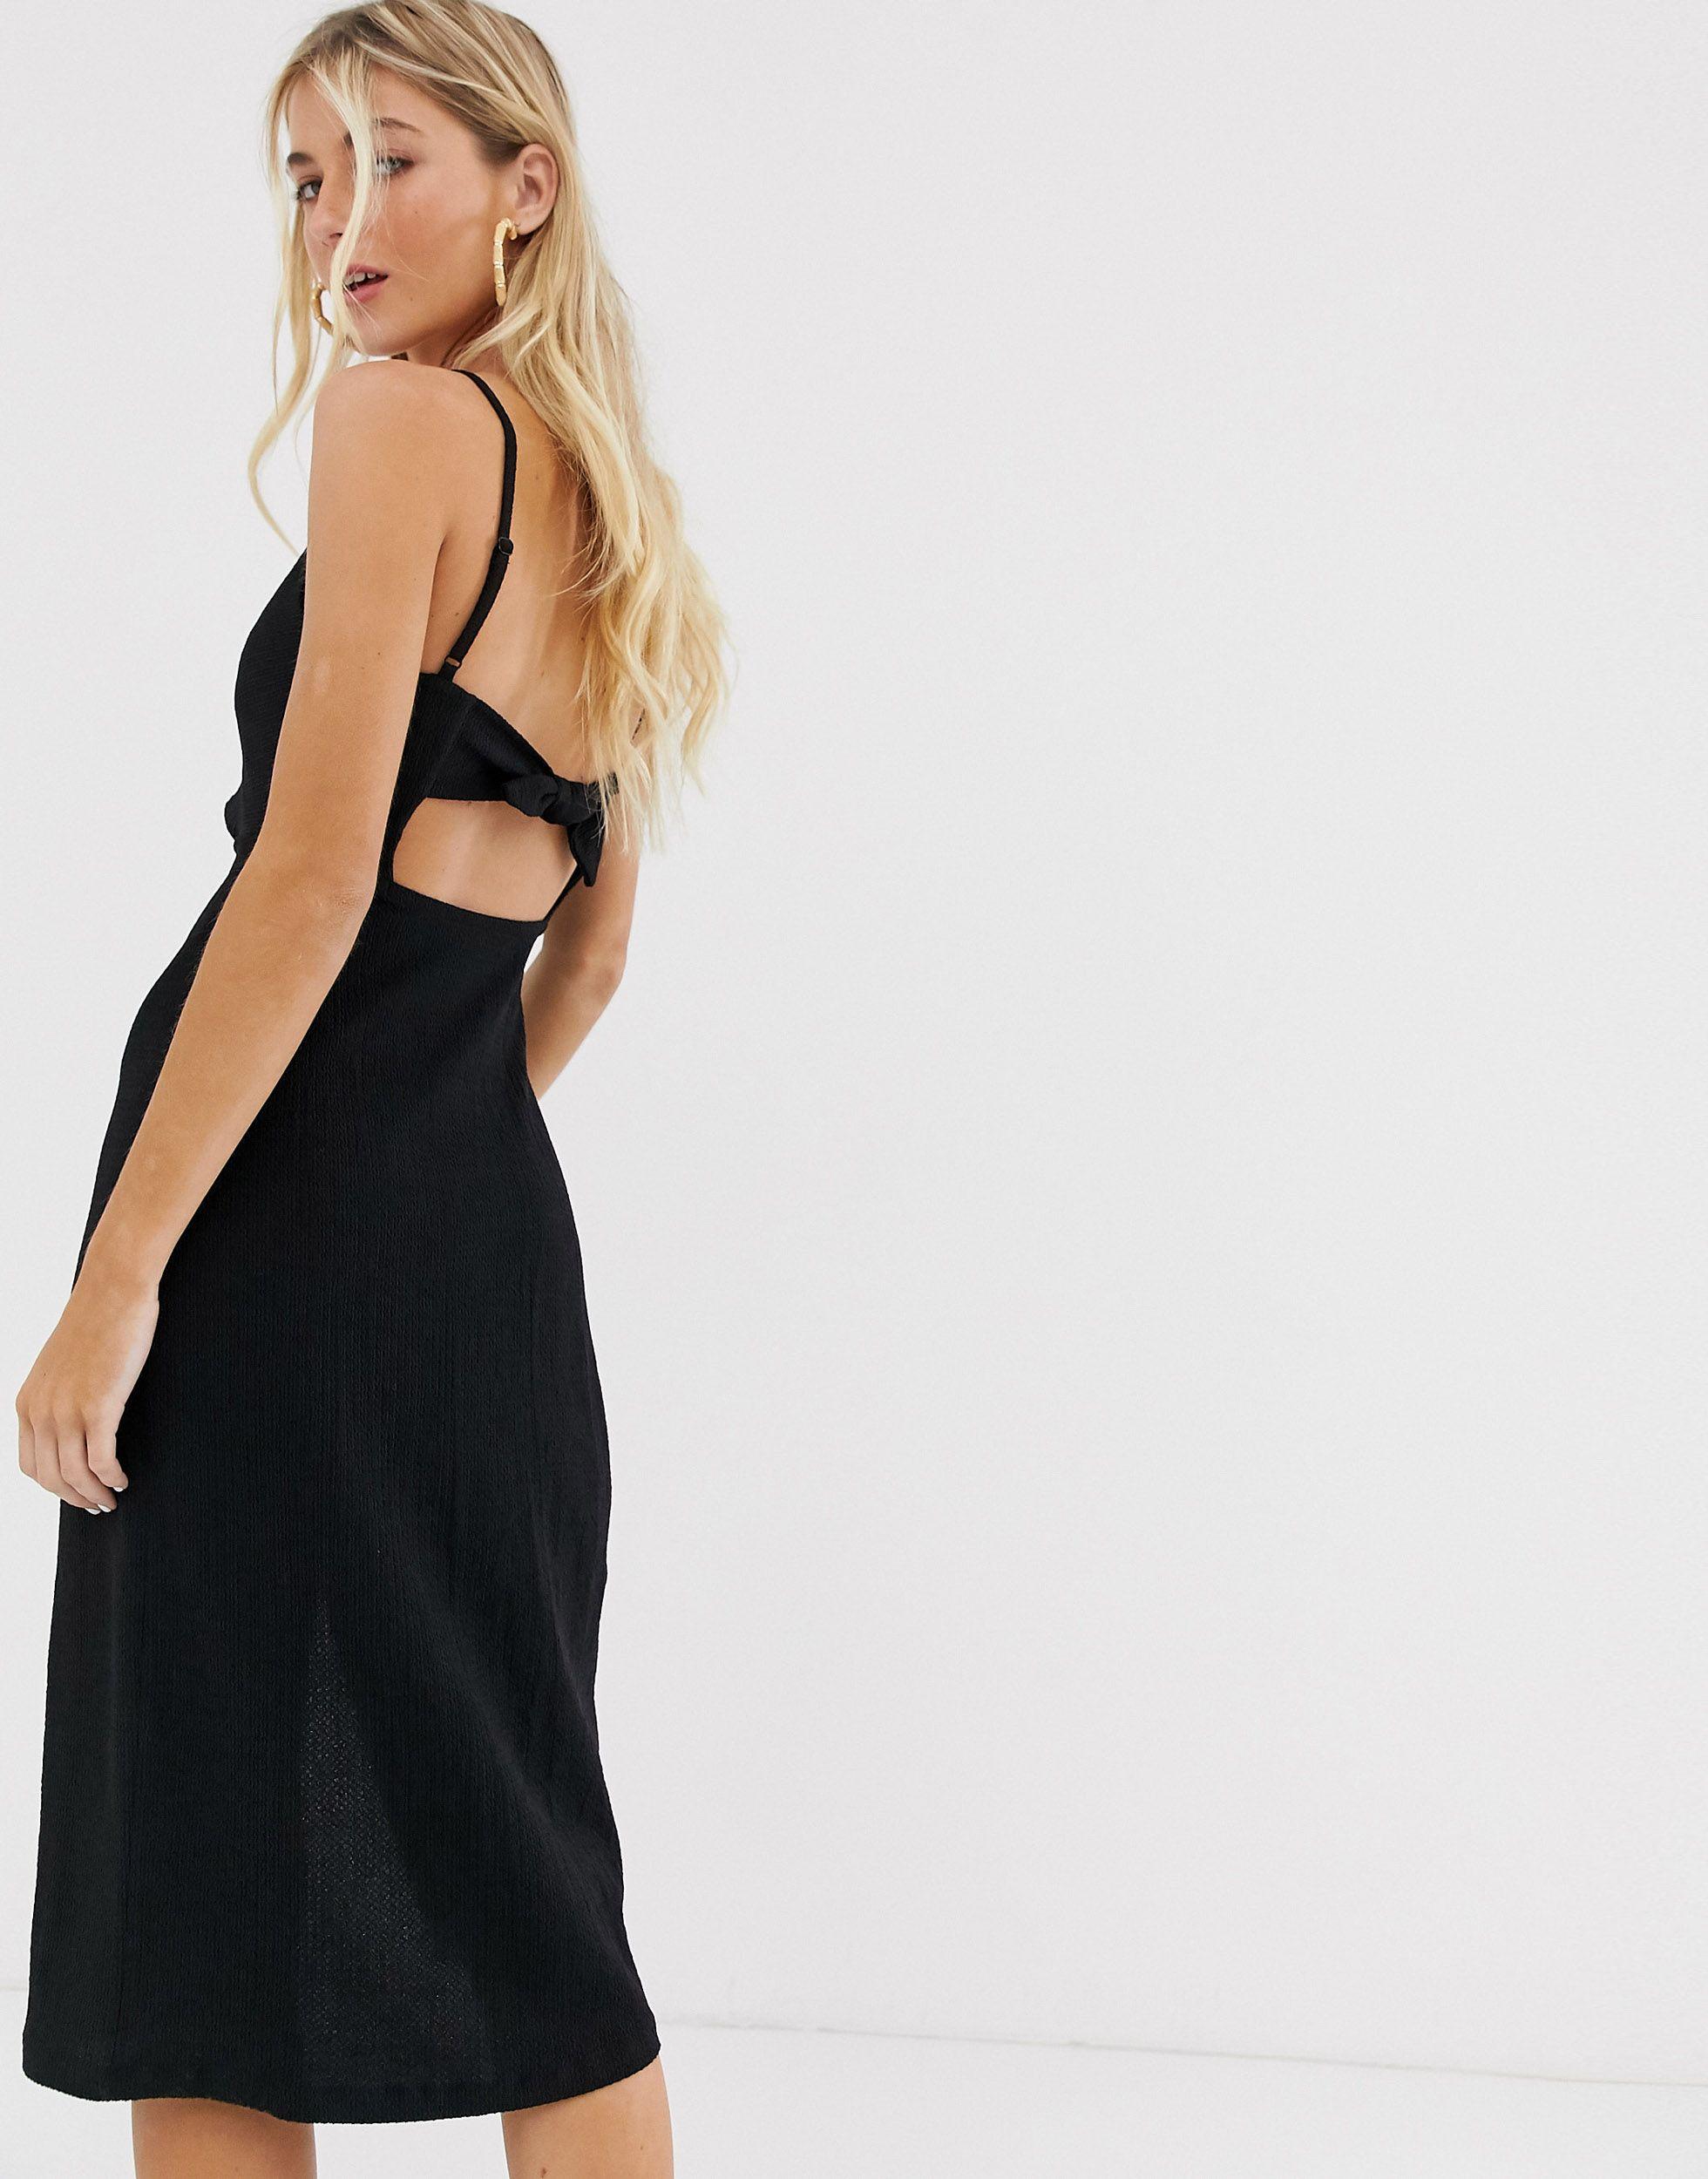 Bershka Cami Dress With Knot Front in Black | Lyst